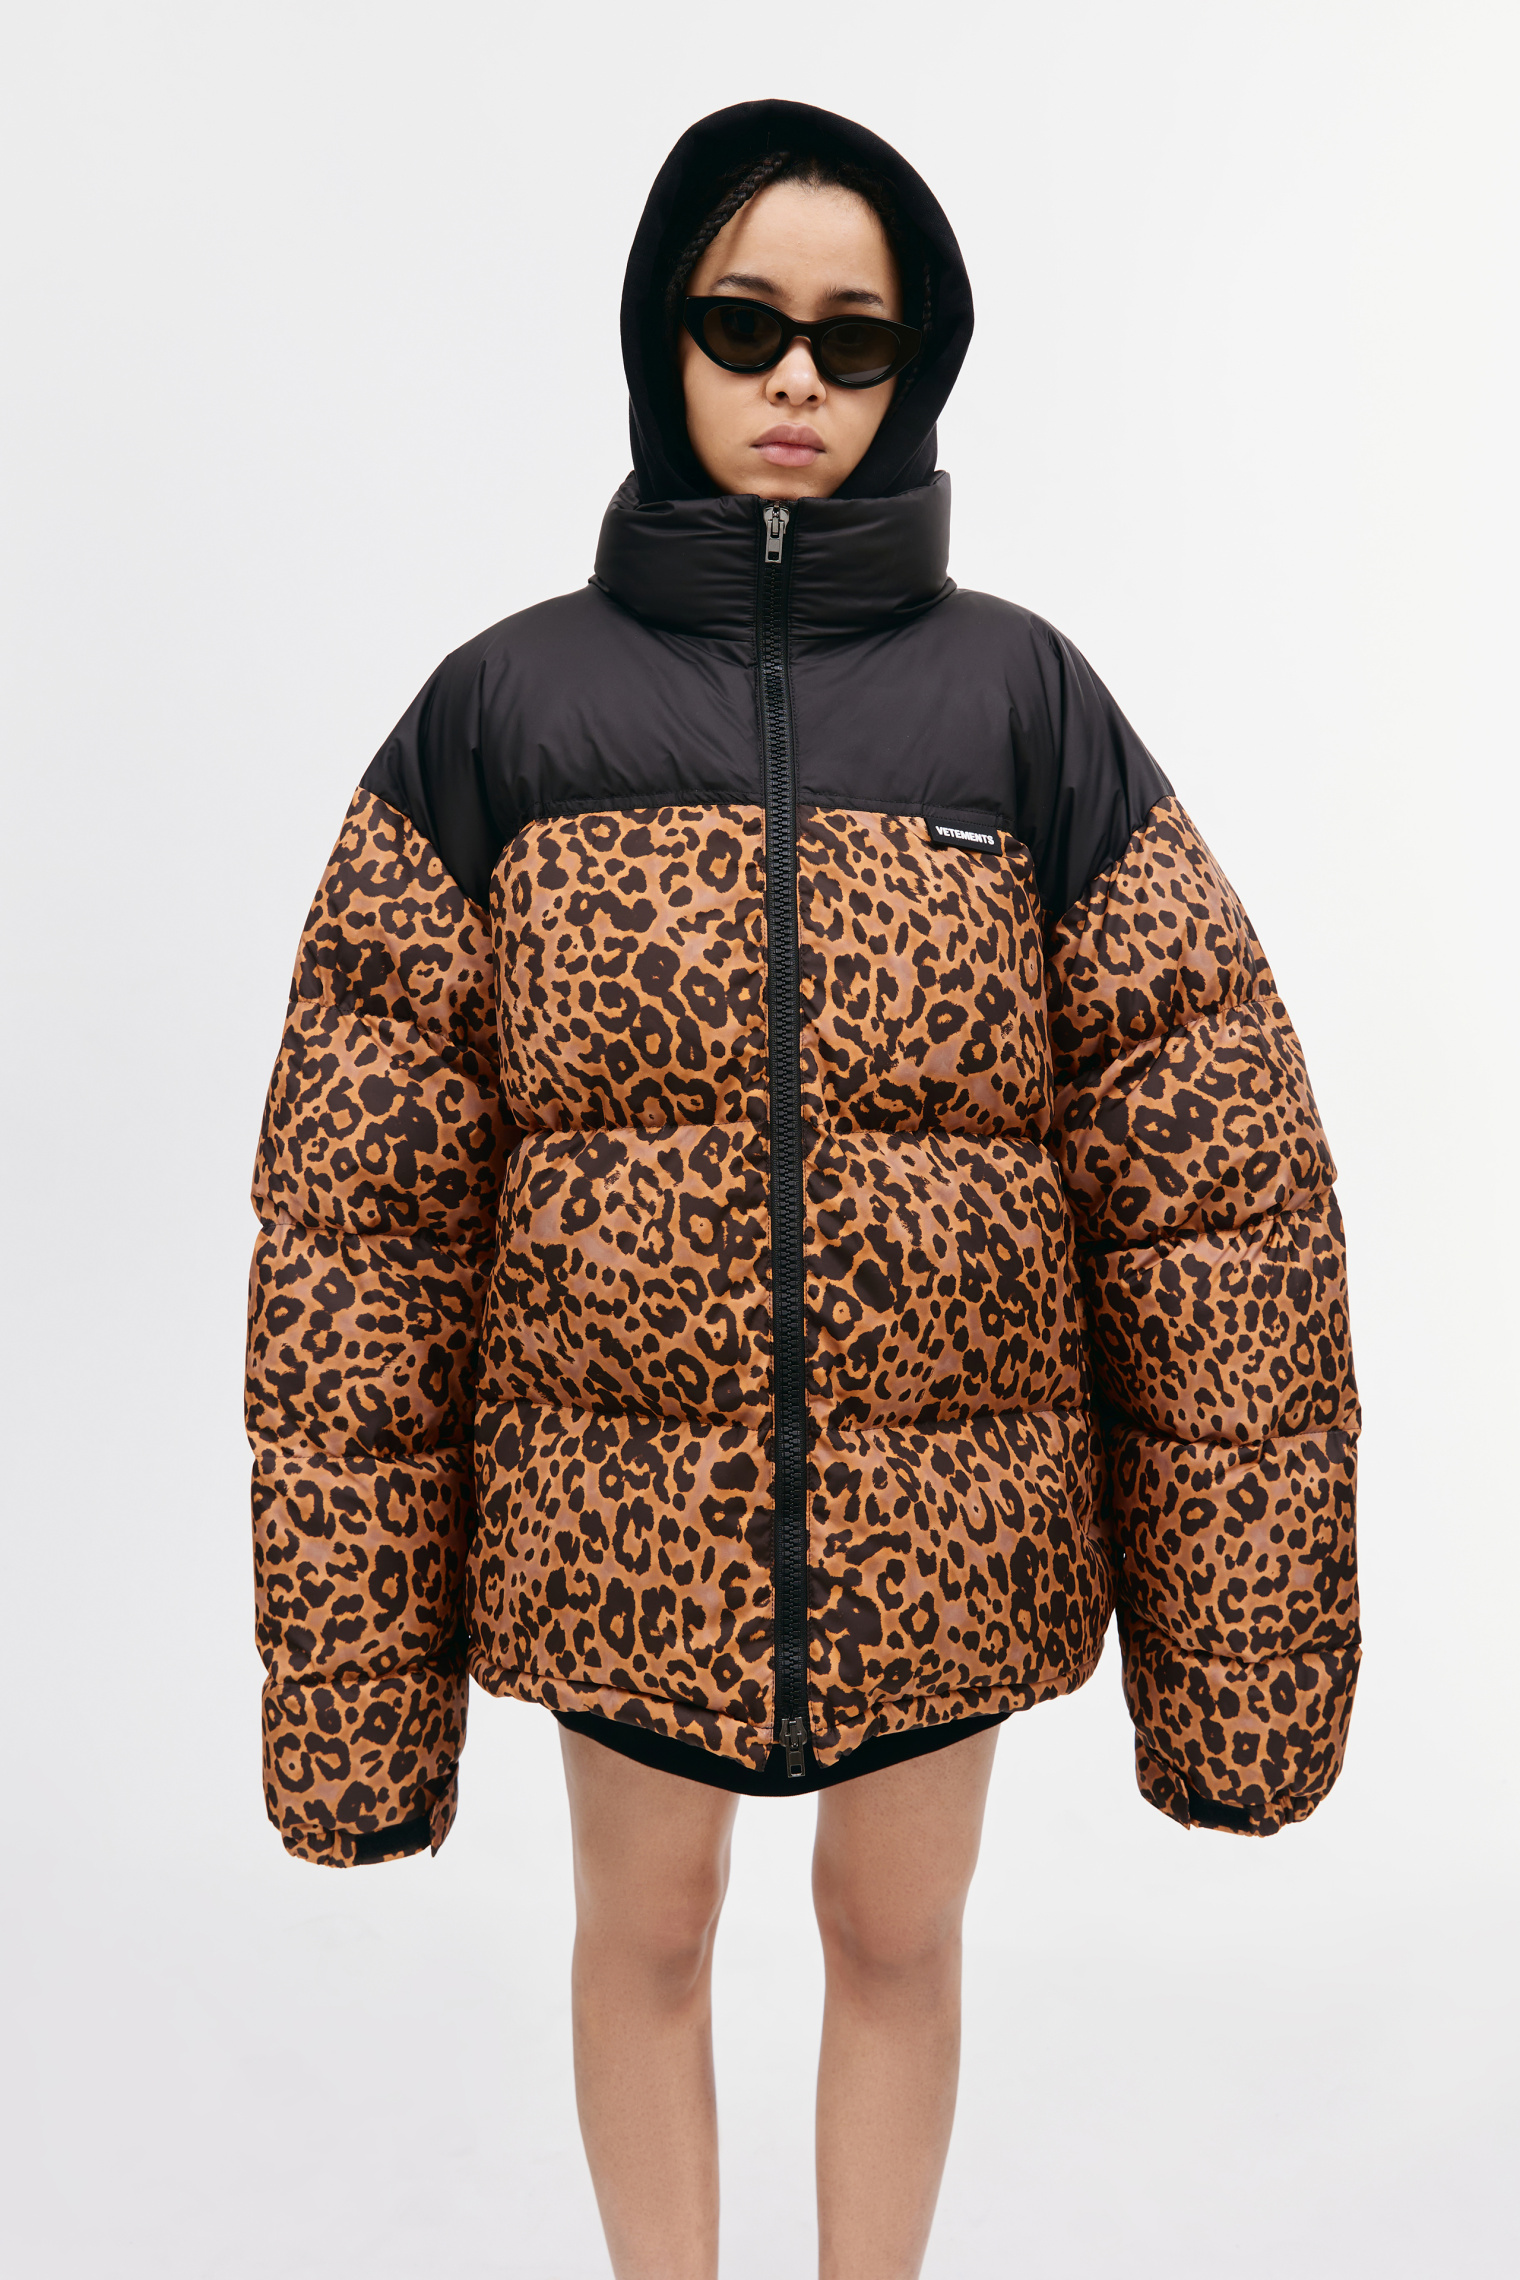 VETEMENTS Down jacket with animal print